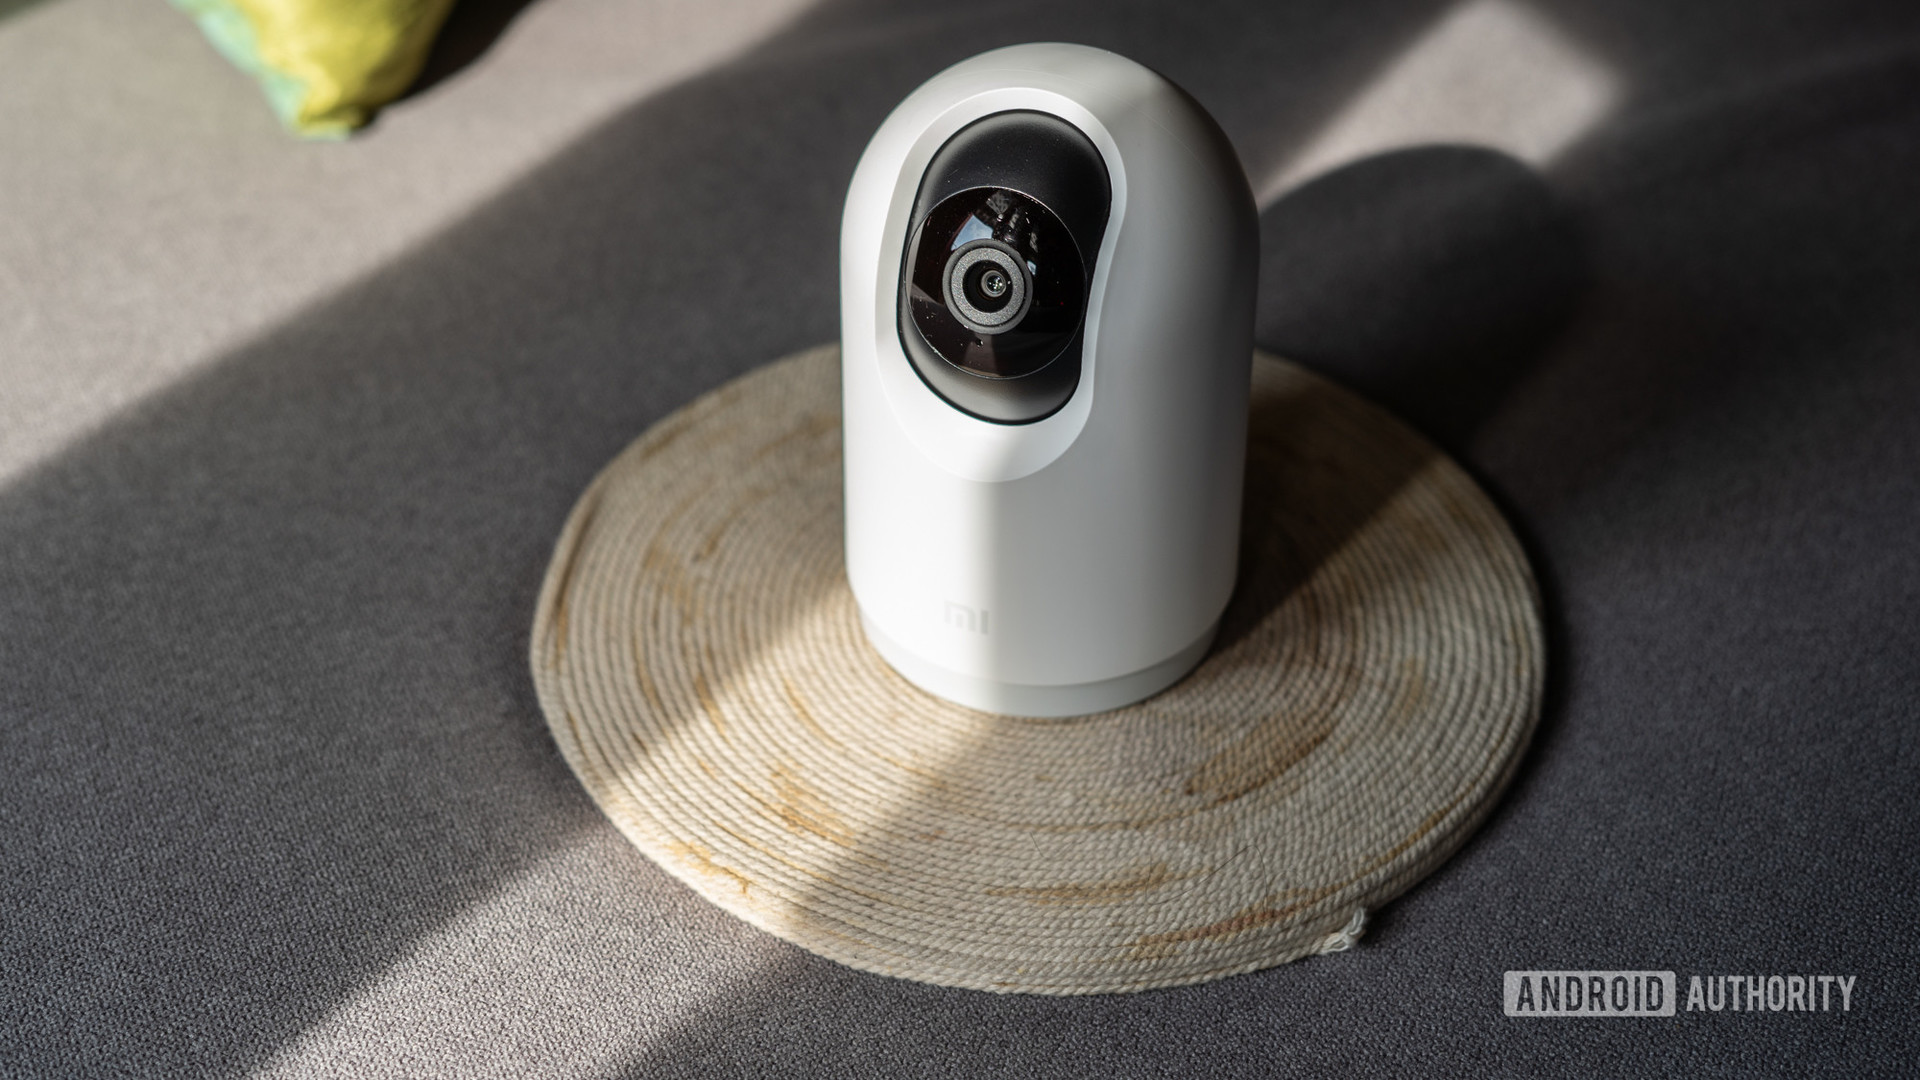 Front of the Mi 360 Home Security Camera 2K Pro with the lens open